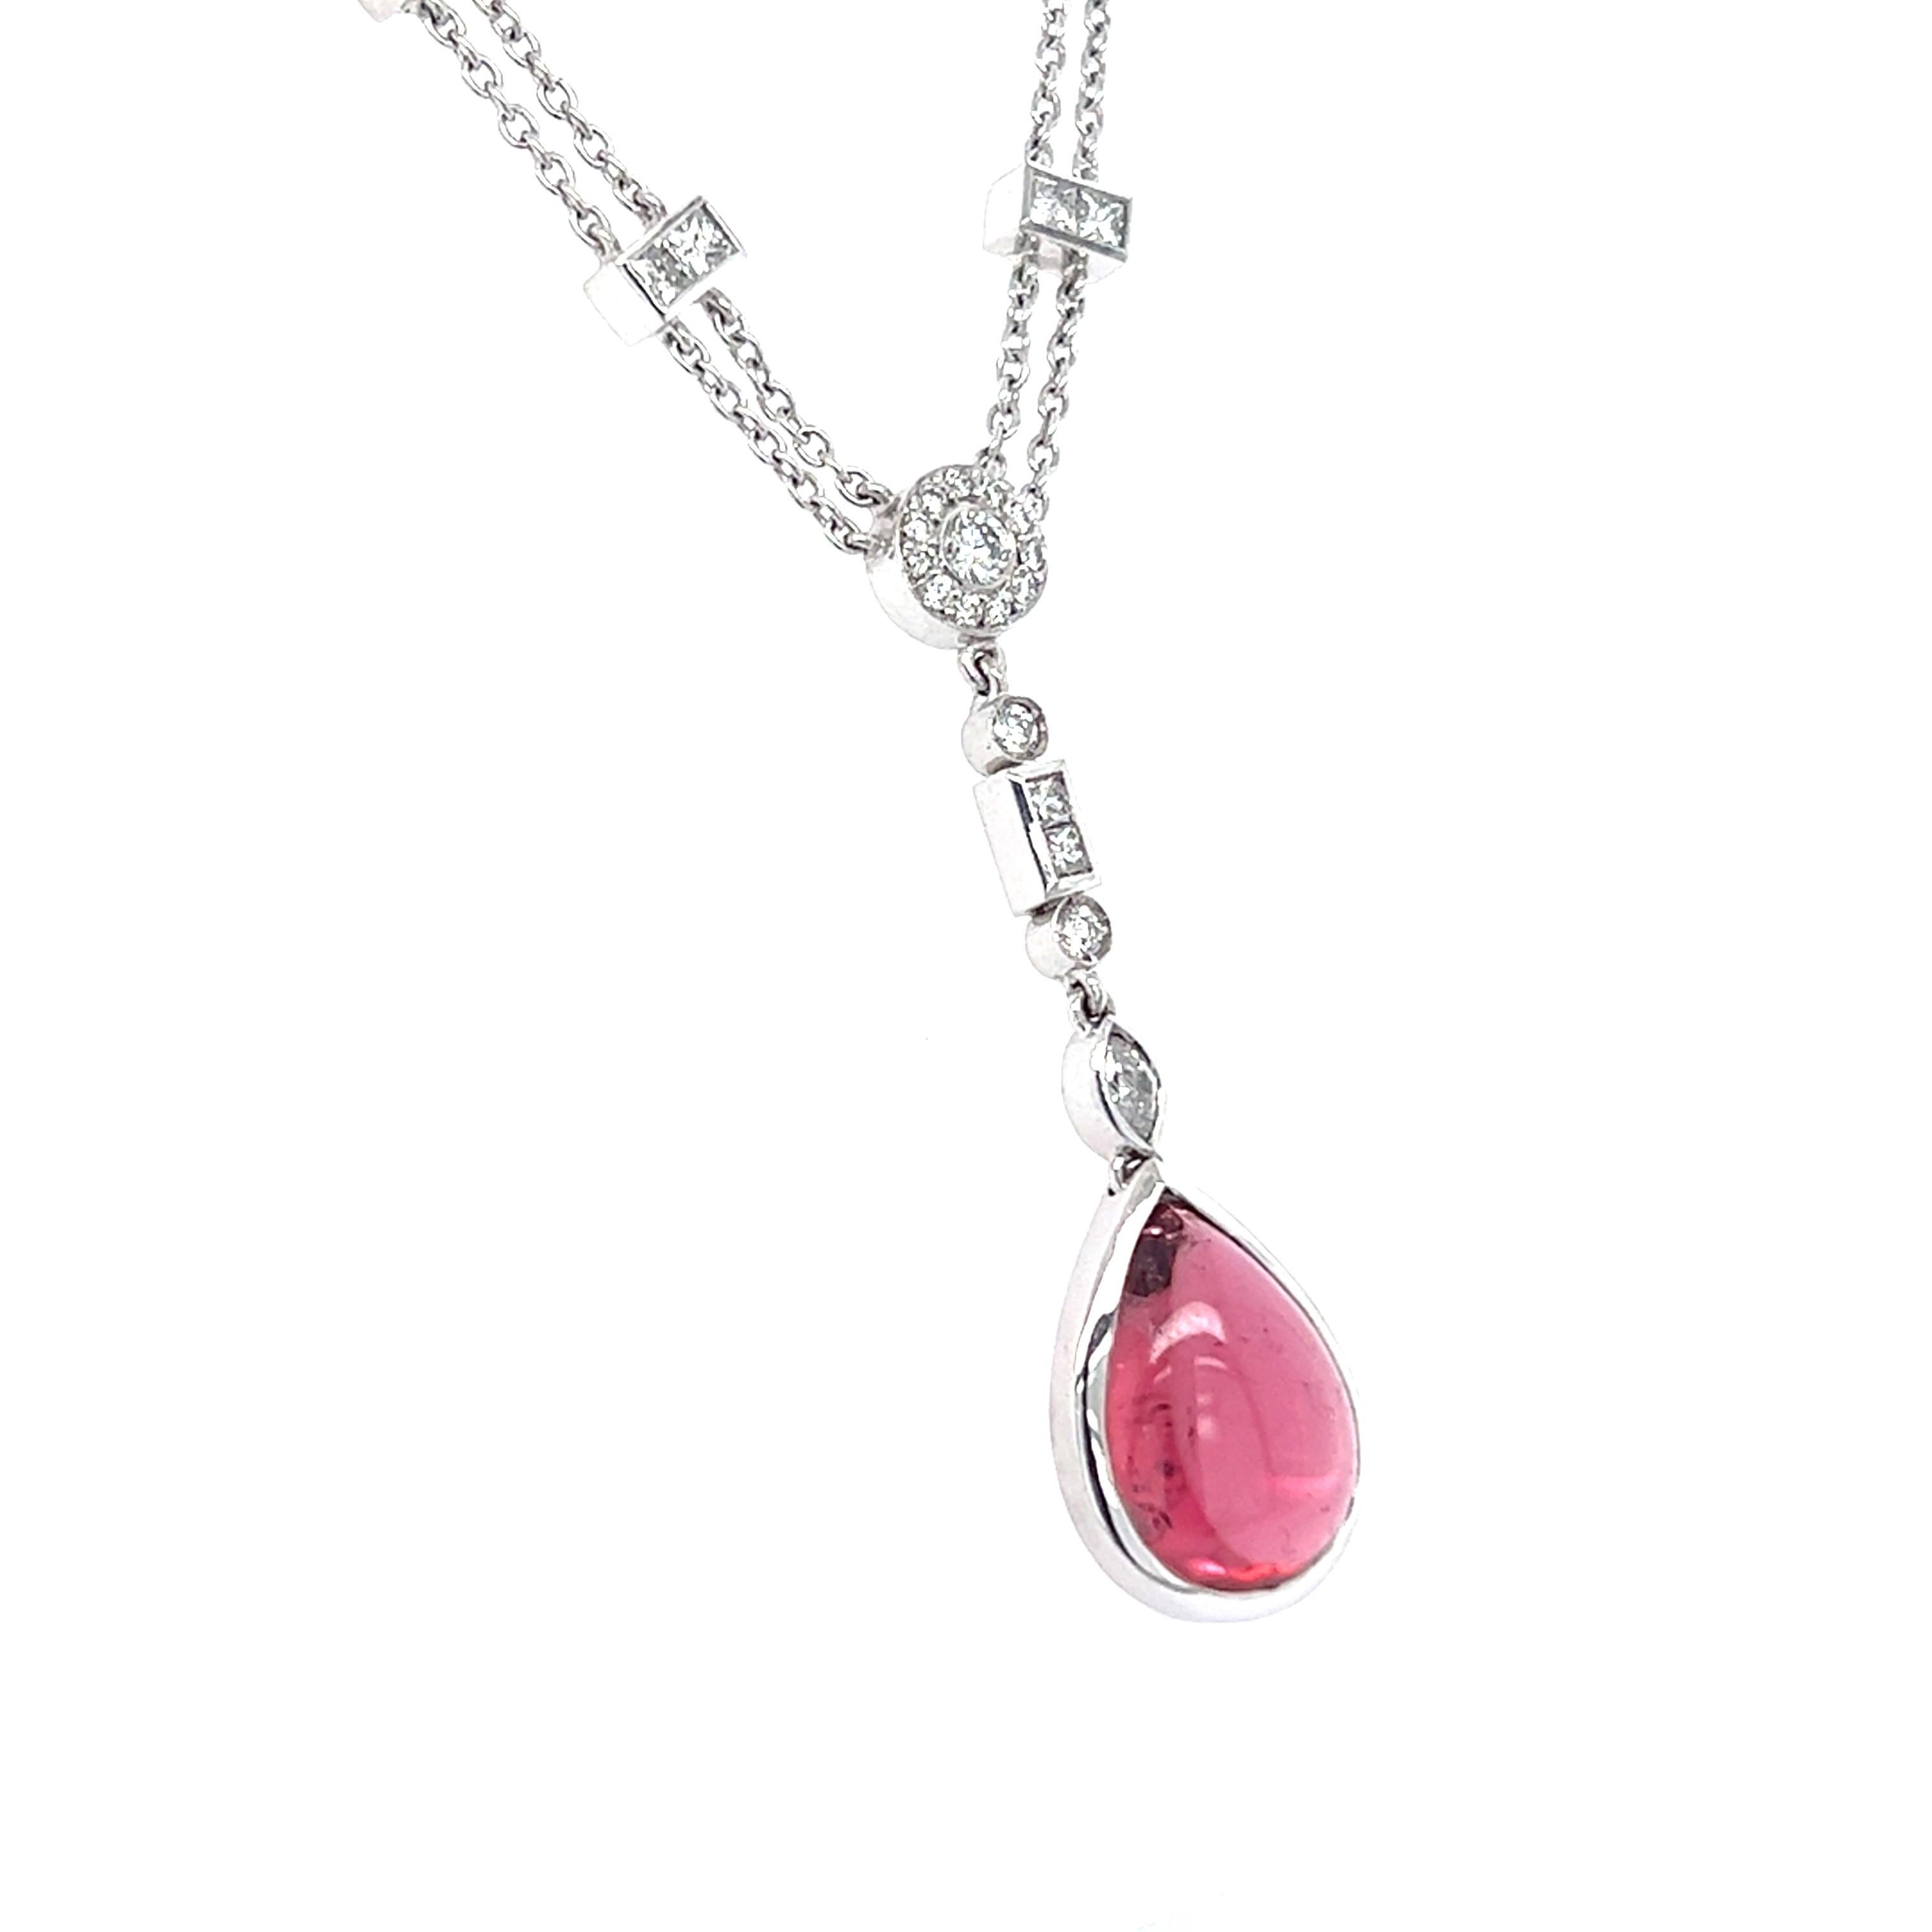 This 18-carat white gold necklace features pink, pear-shaped cabochon tourmaline, totalling 2.59ct. This gemstone is accompanied by 18 round brilliant cut white diamonds totalling 0.40ct, 1 marquise cut white diamond totalling 0.08ct and 10 princess